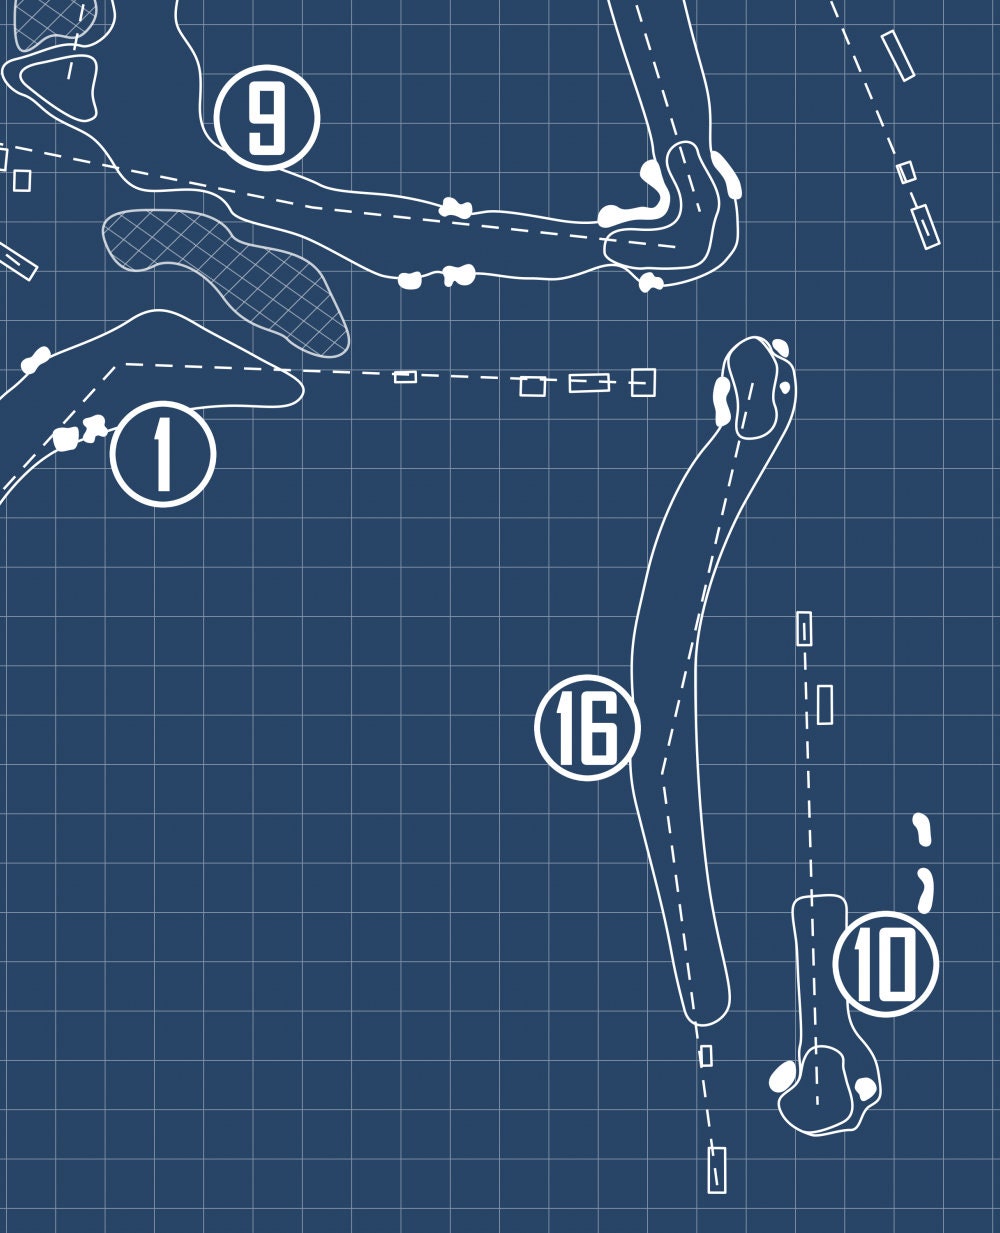 Wing Point Golf & Country Club Blueprint (Print)